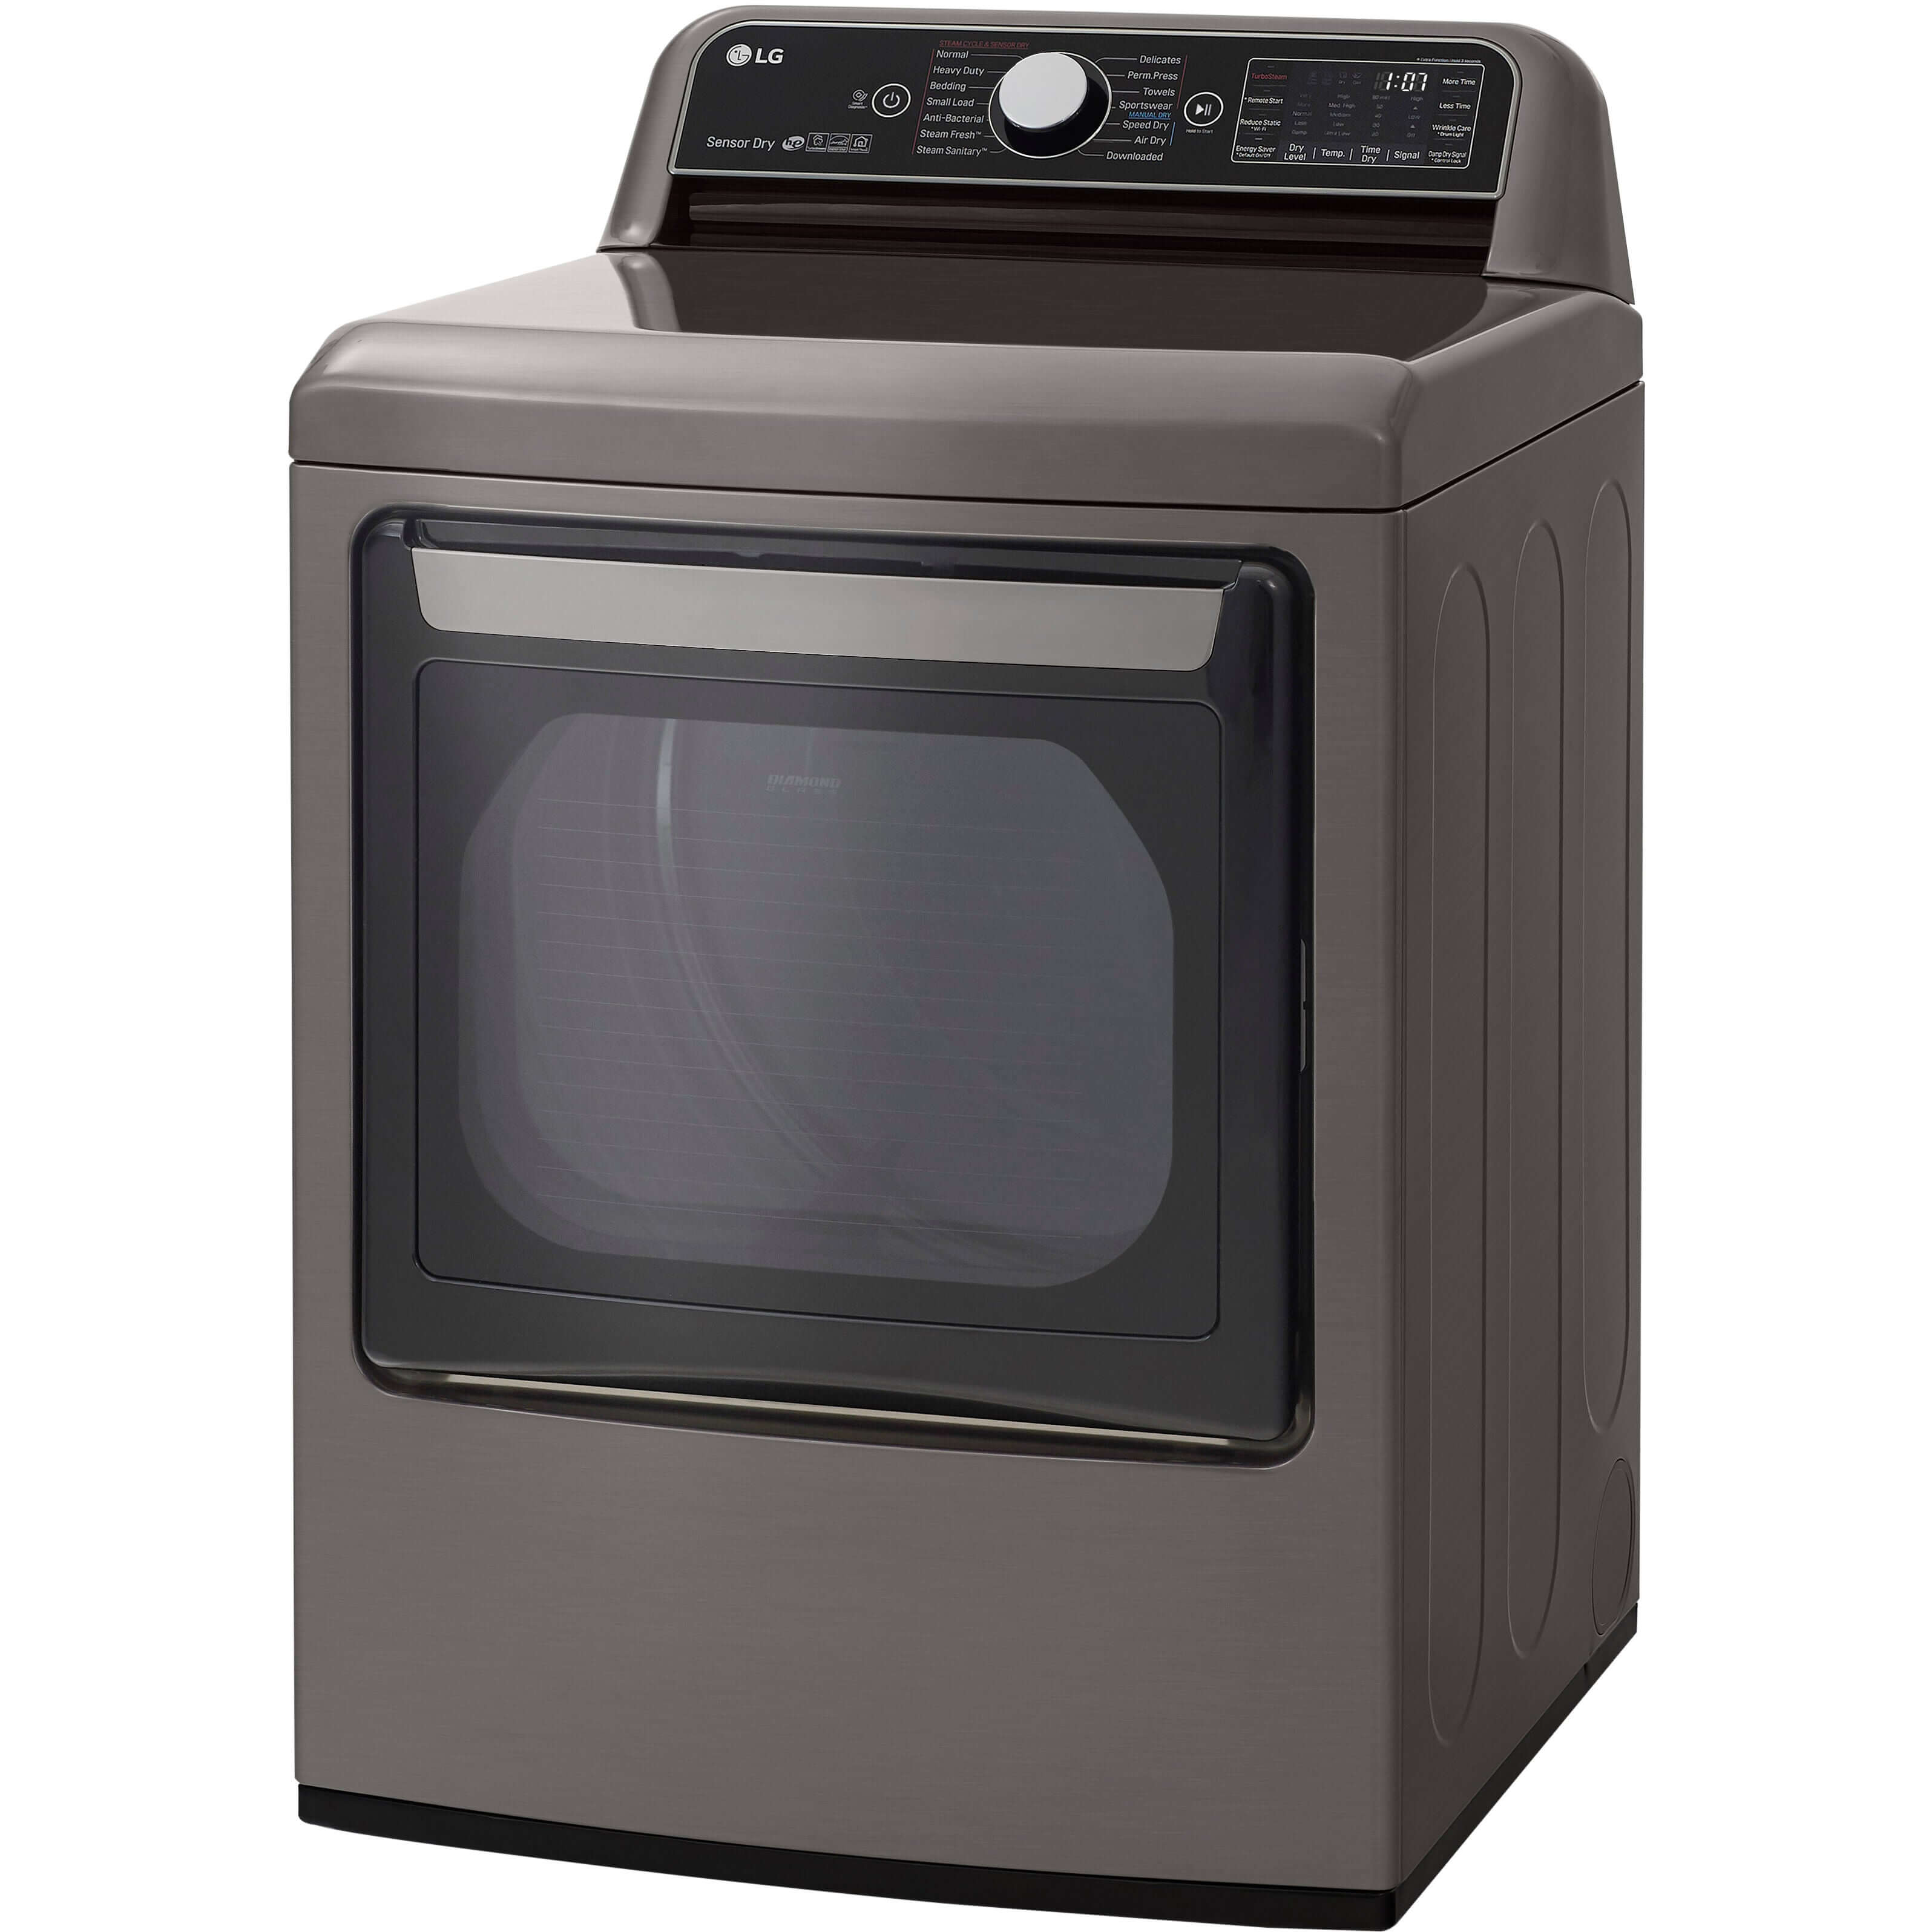 LG 27 Inch Smart wi-fi Enabled Electric Dryer with TurboSteam In Graphite Steel 7.3 cu. ft. (DLEX7800VE)